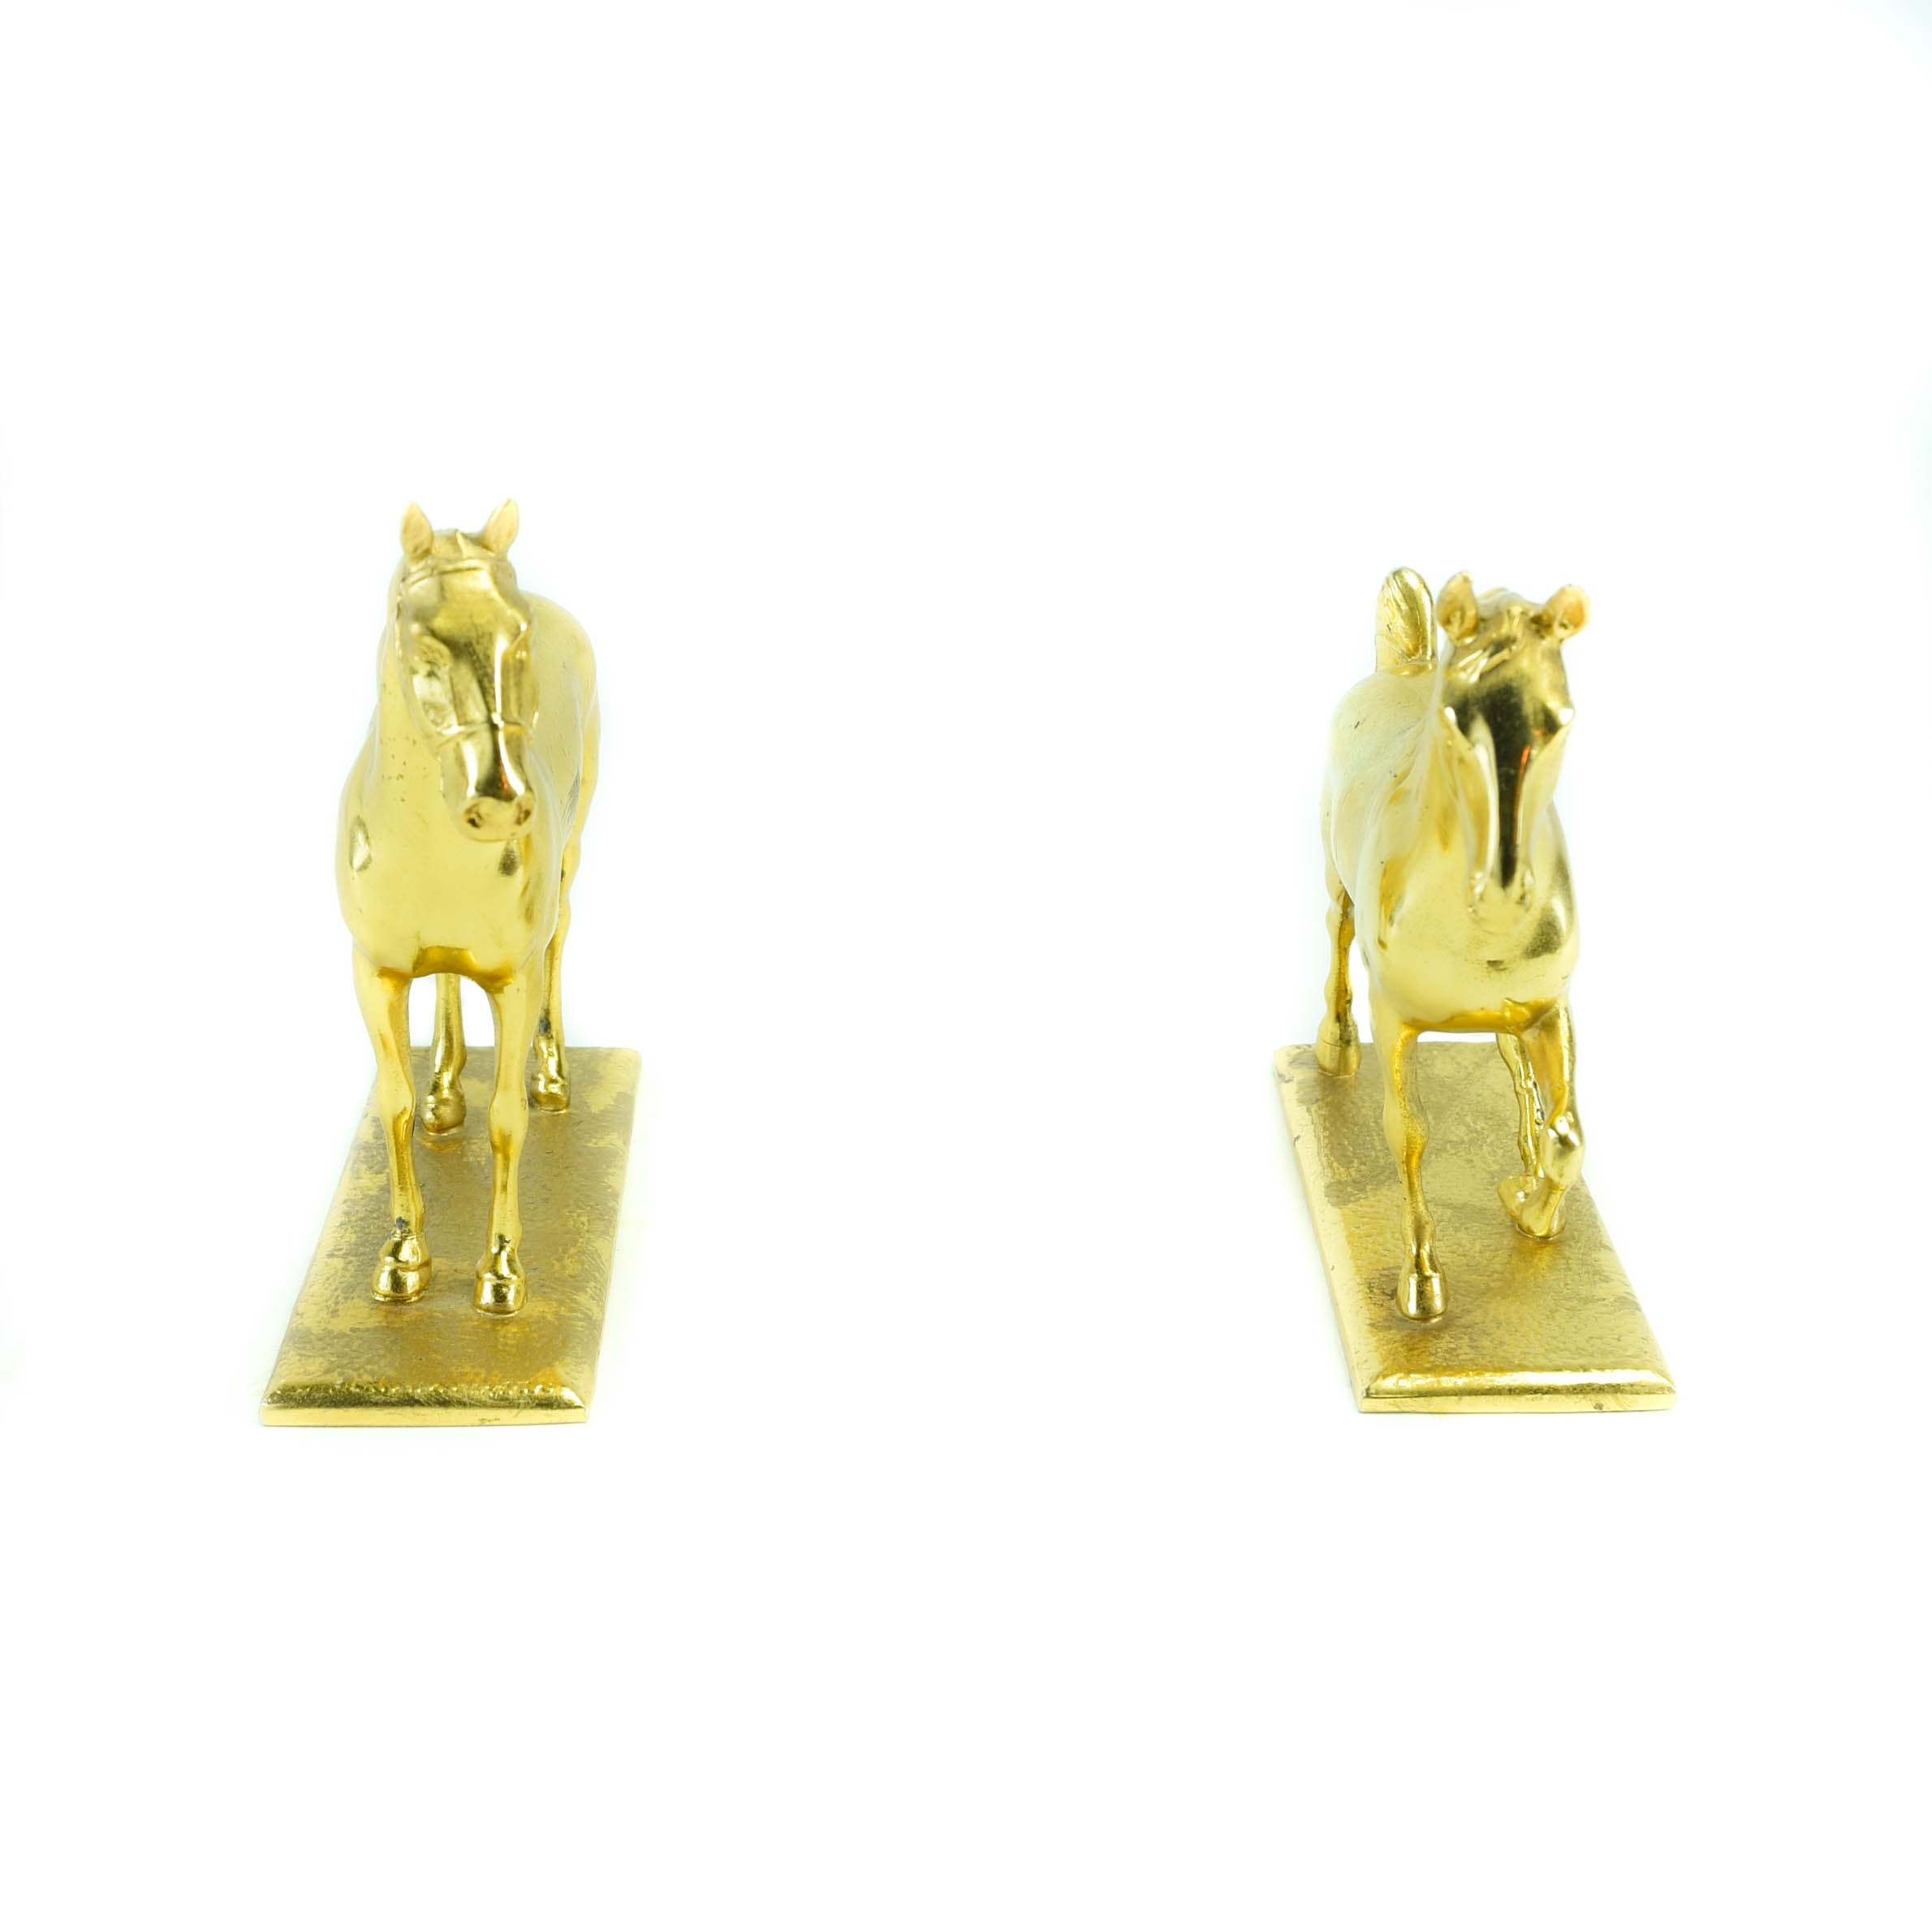 Trotting Horse Bookends